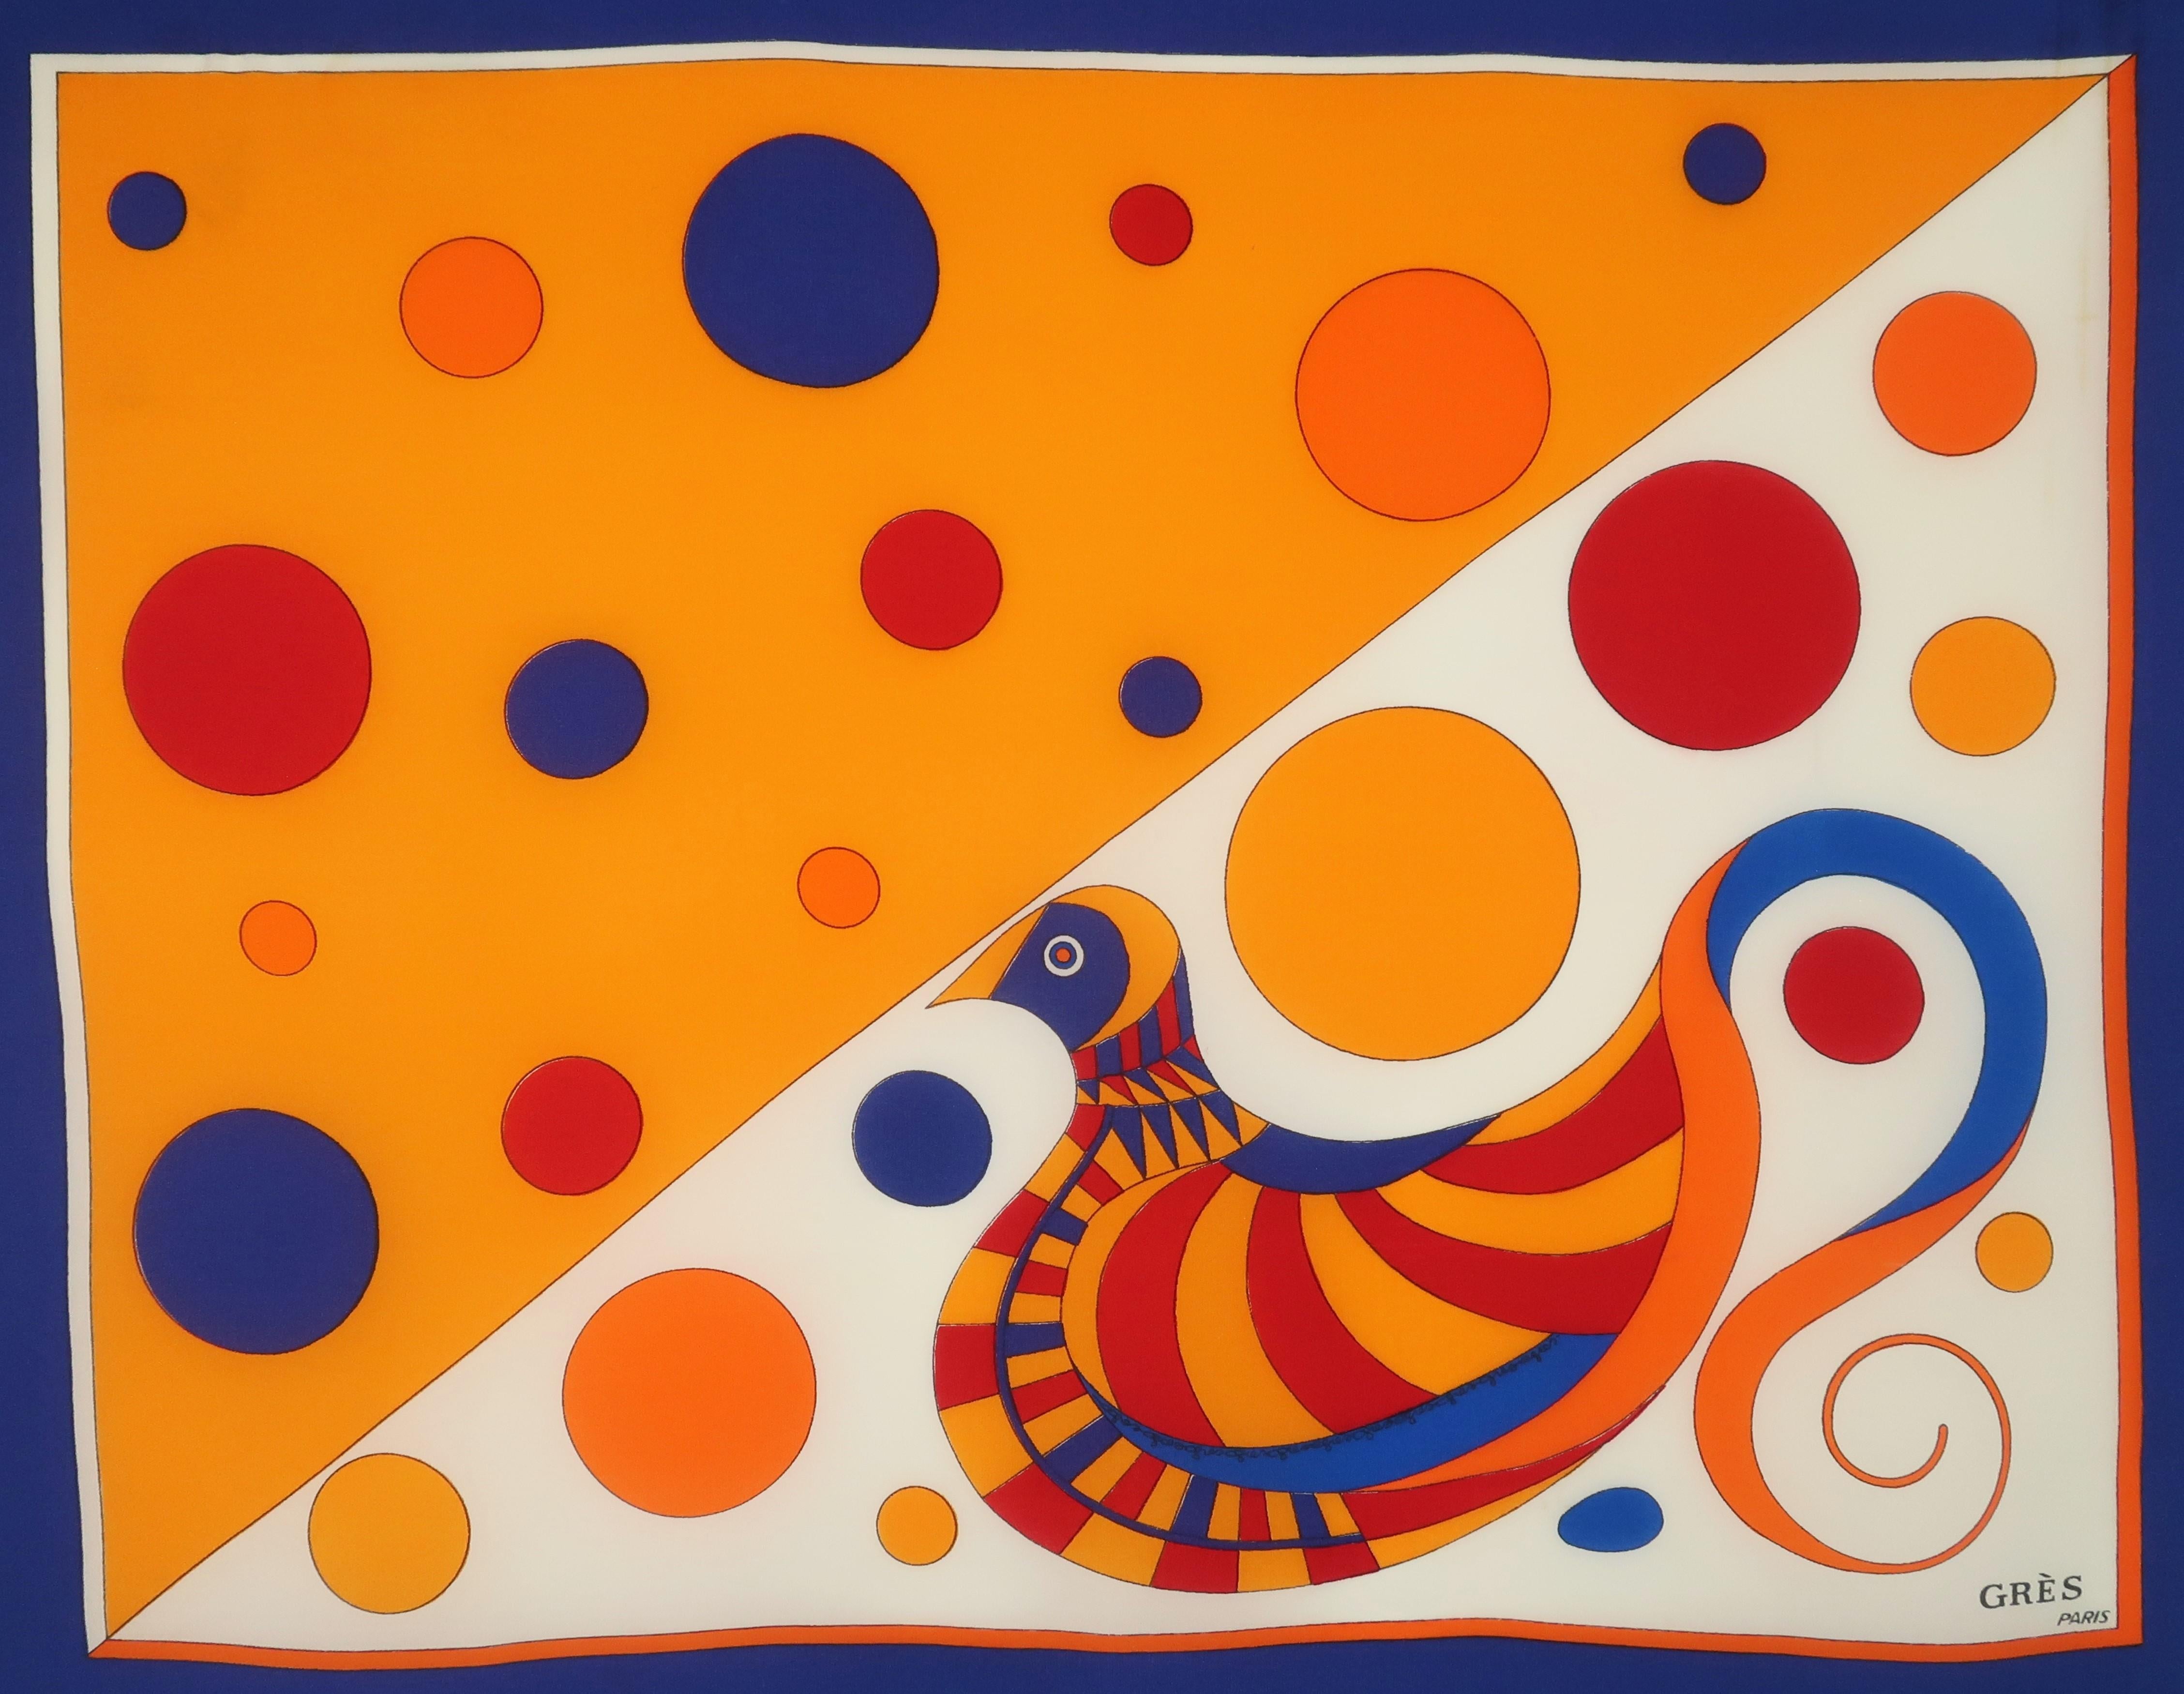 Late 1960's or early 1970's Madame Grès silk scarf with wonderful graphics in shades of yellow, blue and red depicting a bird and floating polka dots in the style of Alexander Calder.  Made in France and large enough for an accessory to wear at the